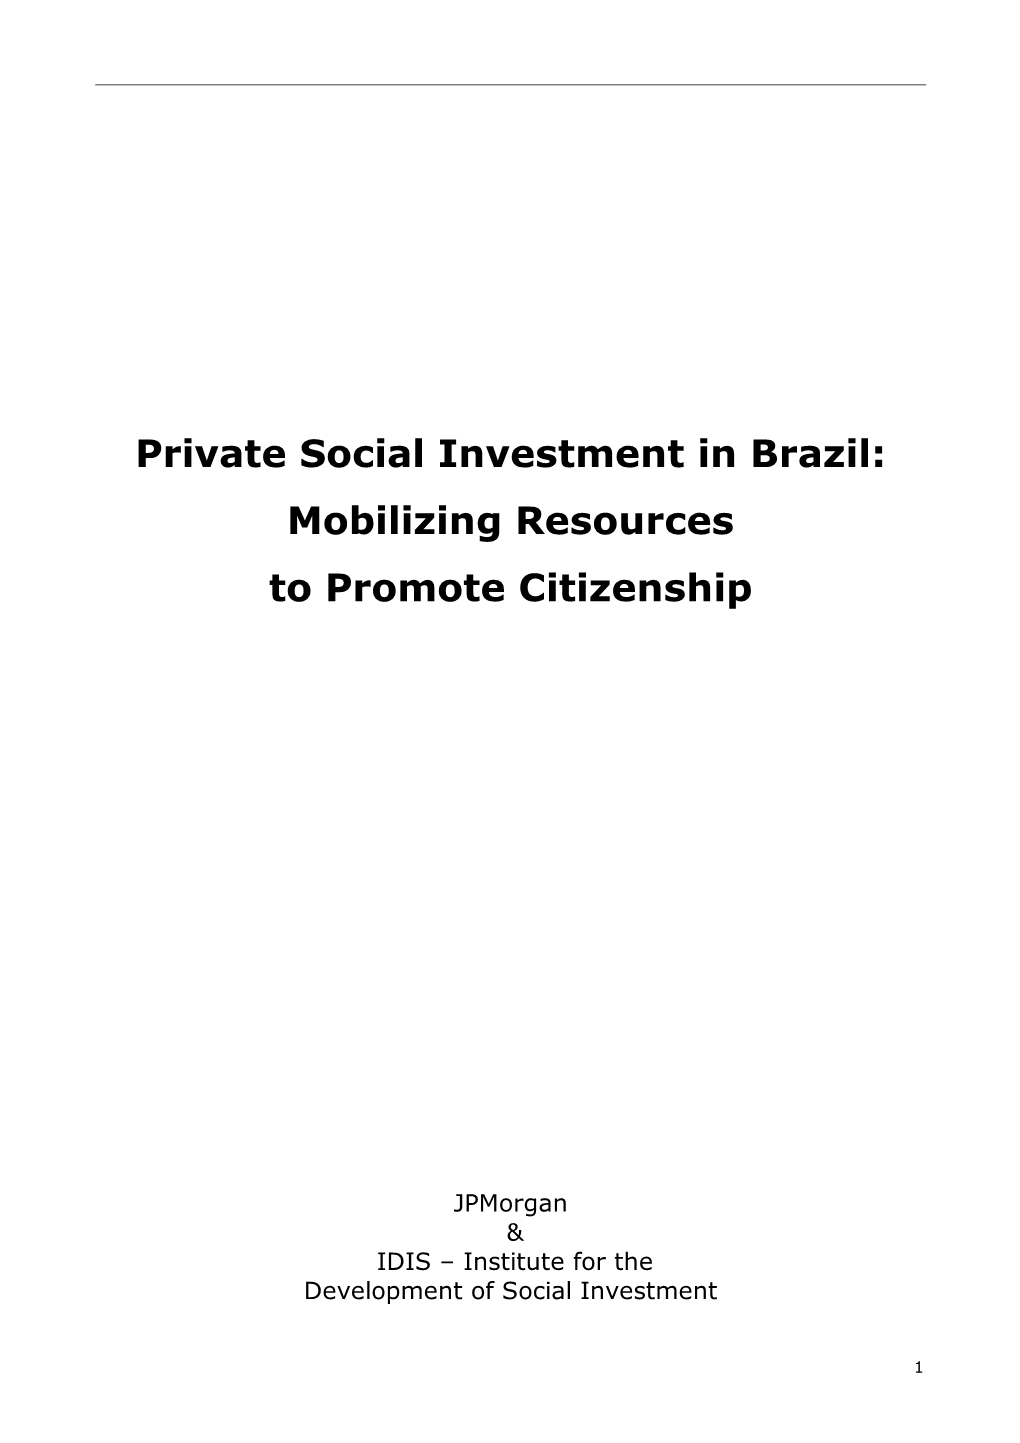 Private Social Investment in Brazil: Mobilizing Resources to Promote Citizenship